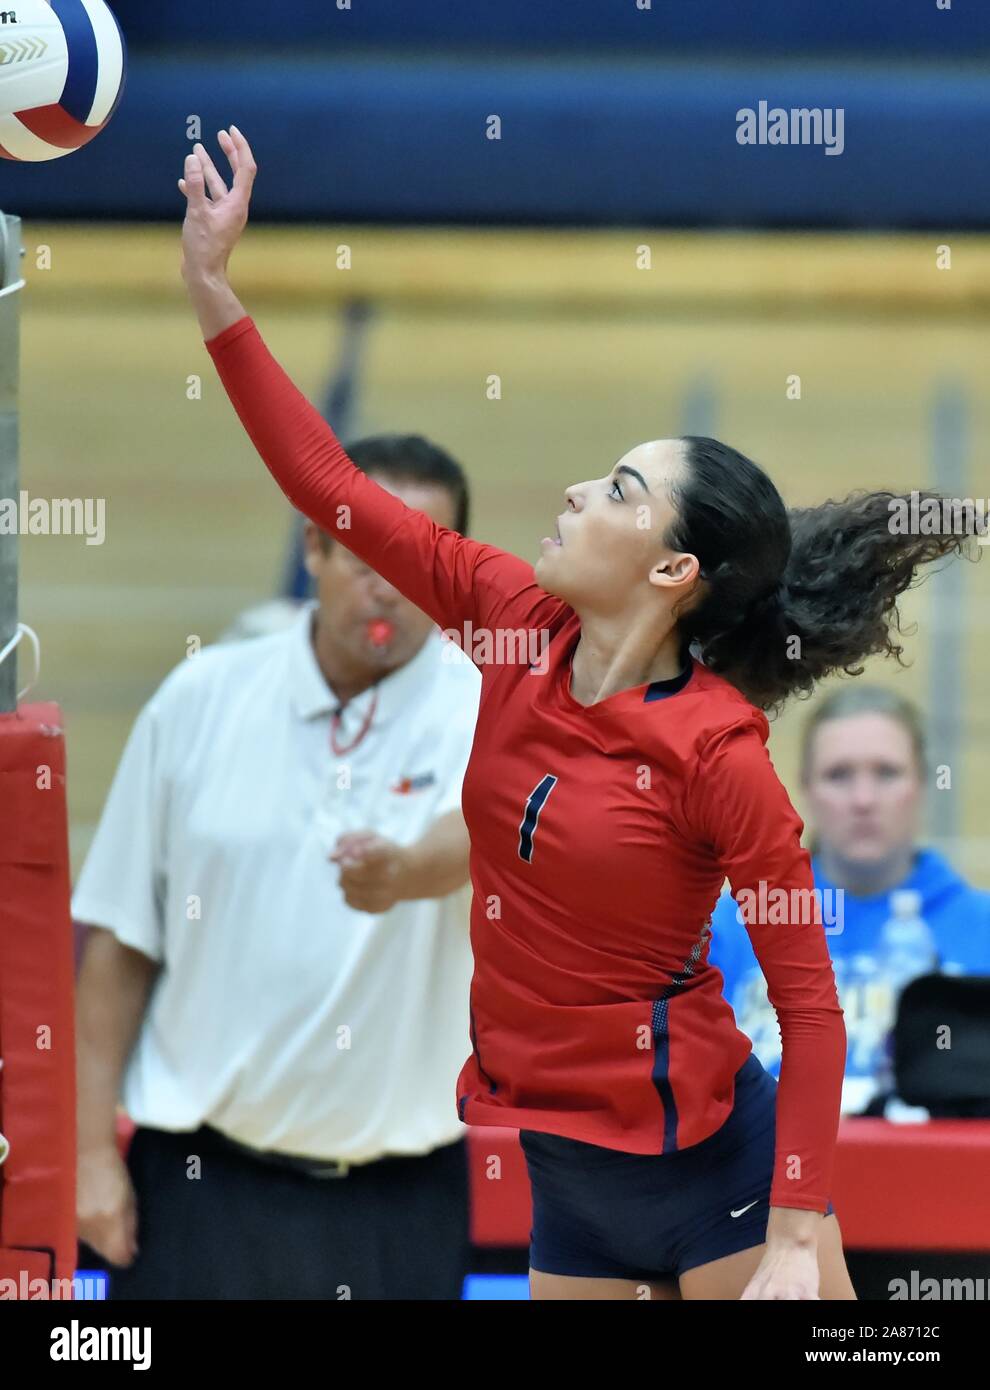 Player directing a drop shot return over the net. USA. Stock Photo